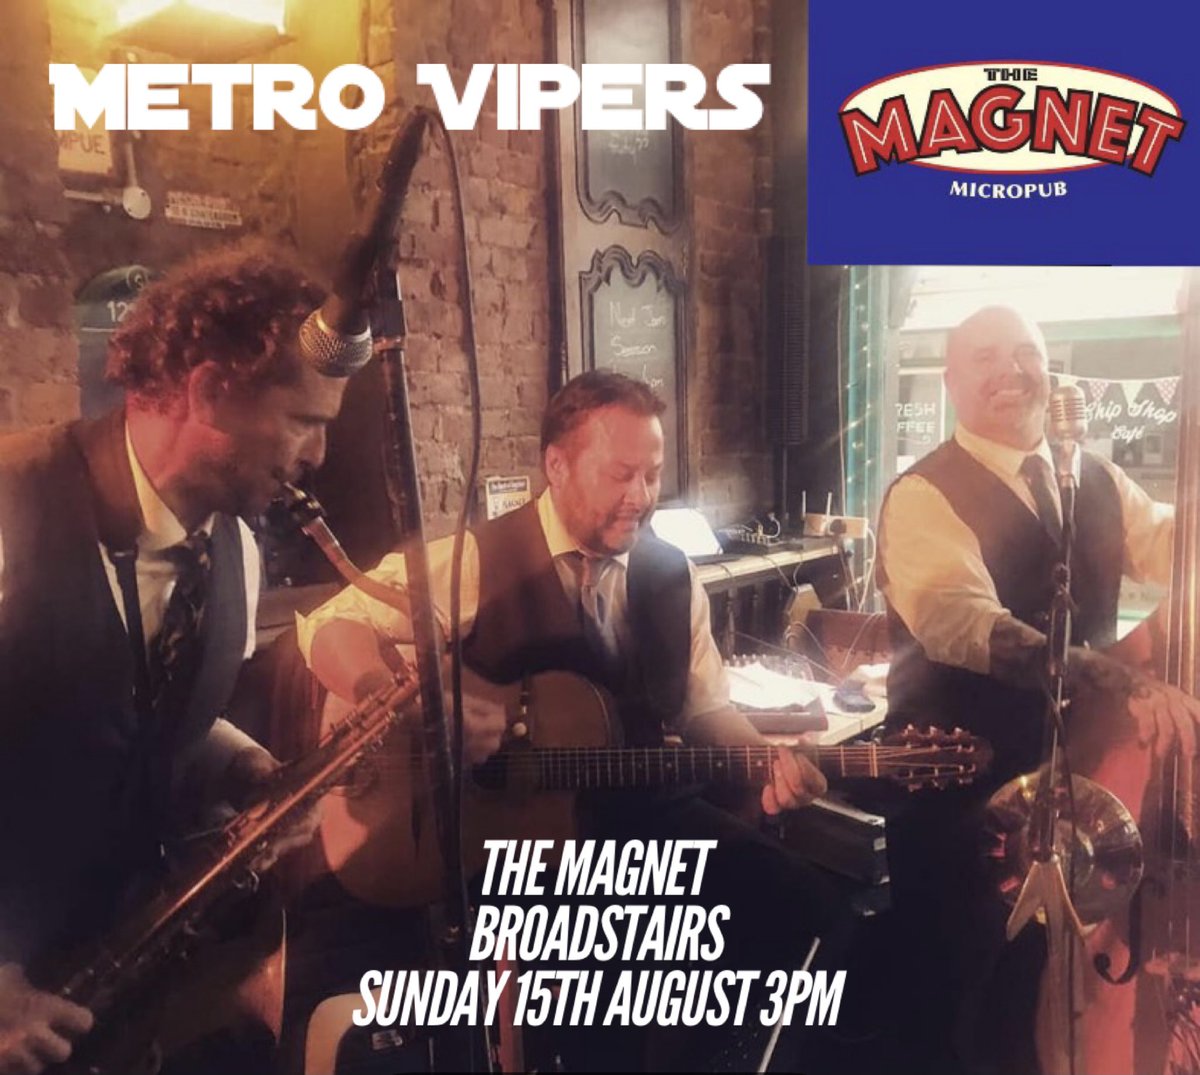 This Sunday 15th August 3pm we’ll be at @Themagnetmicro1 in Albion St #broadstairs #Kent unleashing our arsenal of jaunty swing classics for your listening pleasure, come on down! #gypsyswing #rocknroll #swingjazz #Broadstairskent